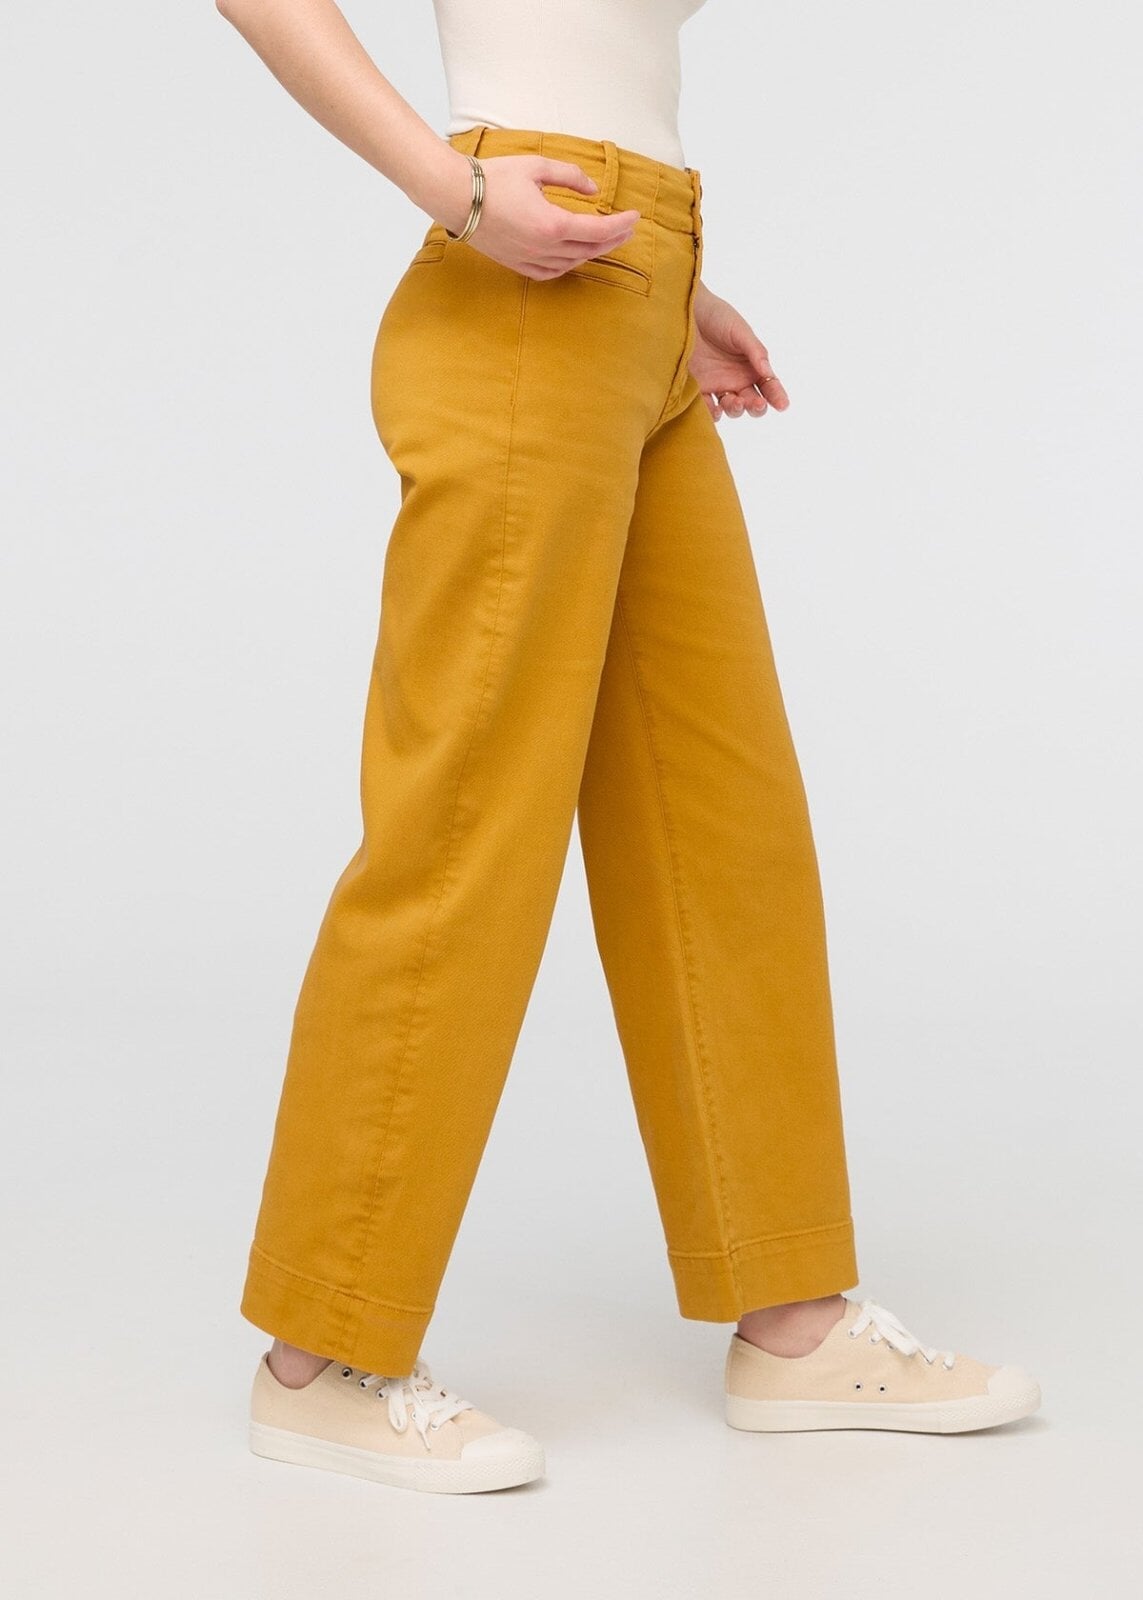 Vintage 70's Yellow, High Waisted, Wide Leg, Pants size 4 -  Canada